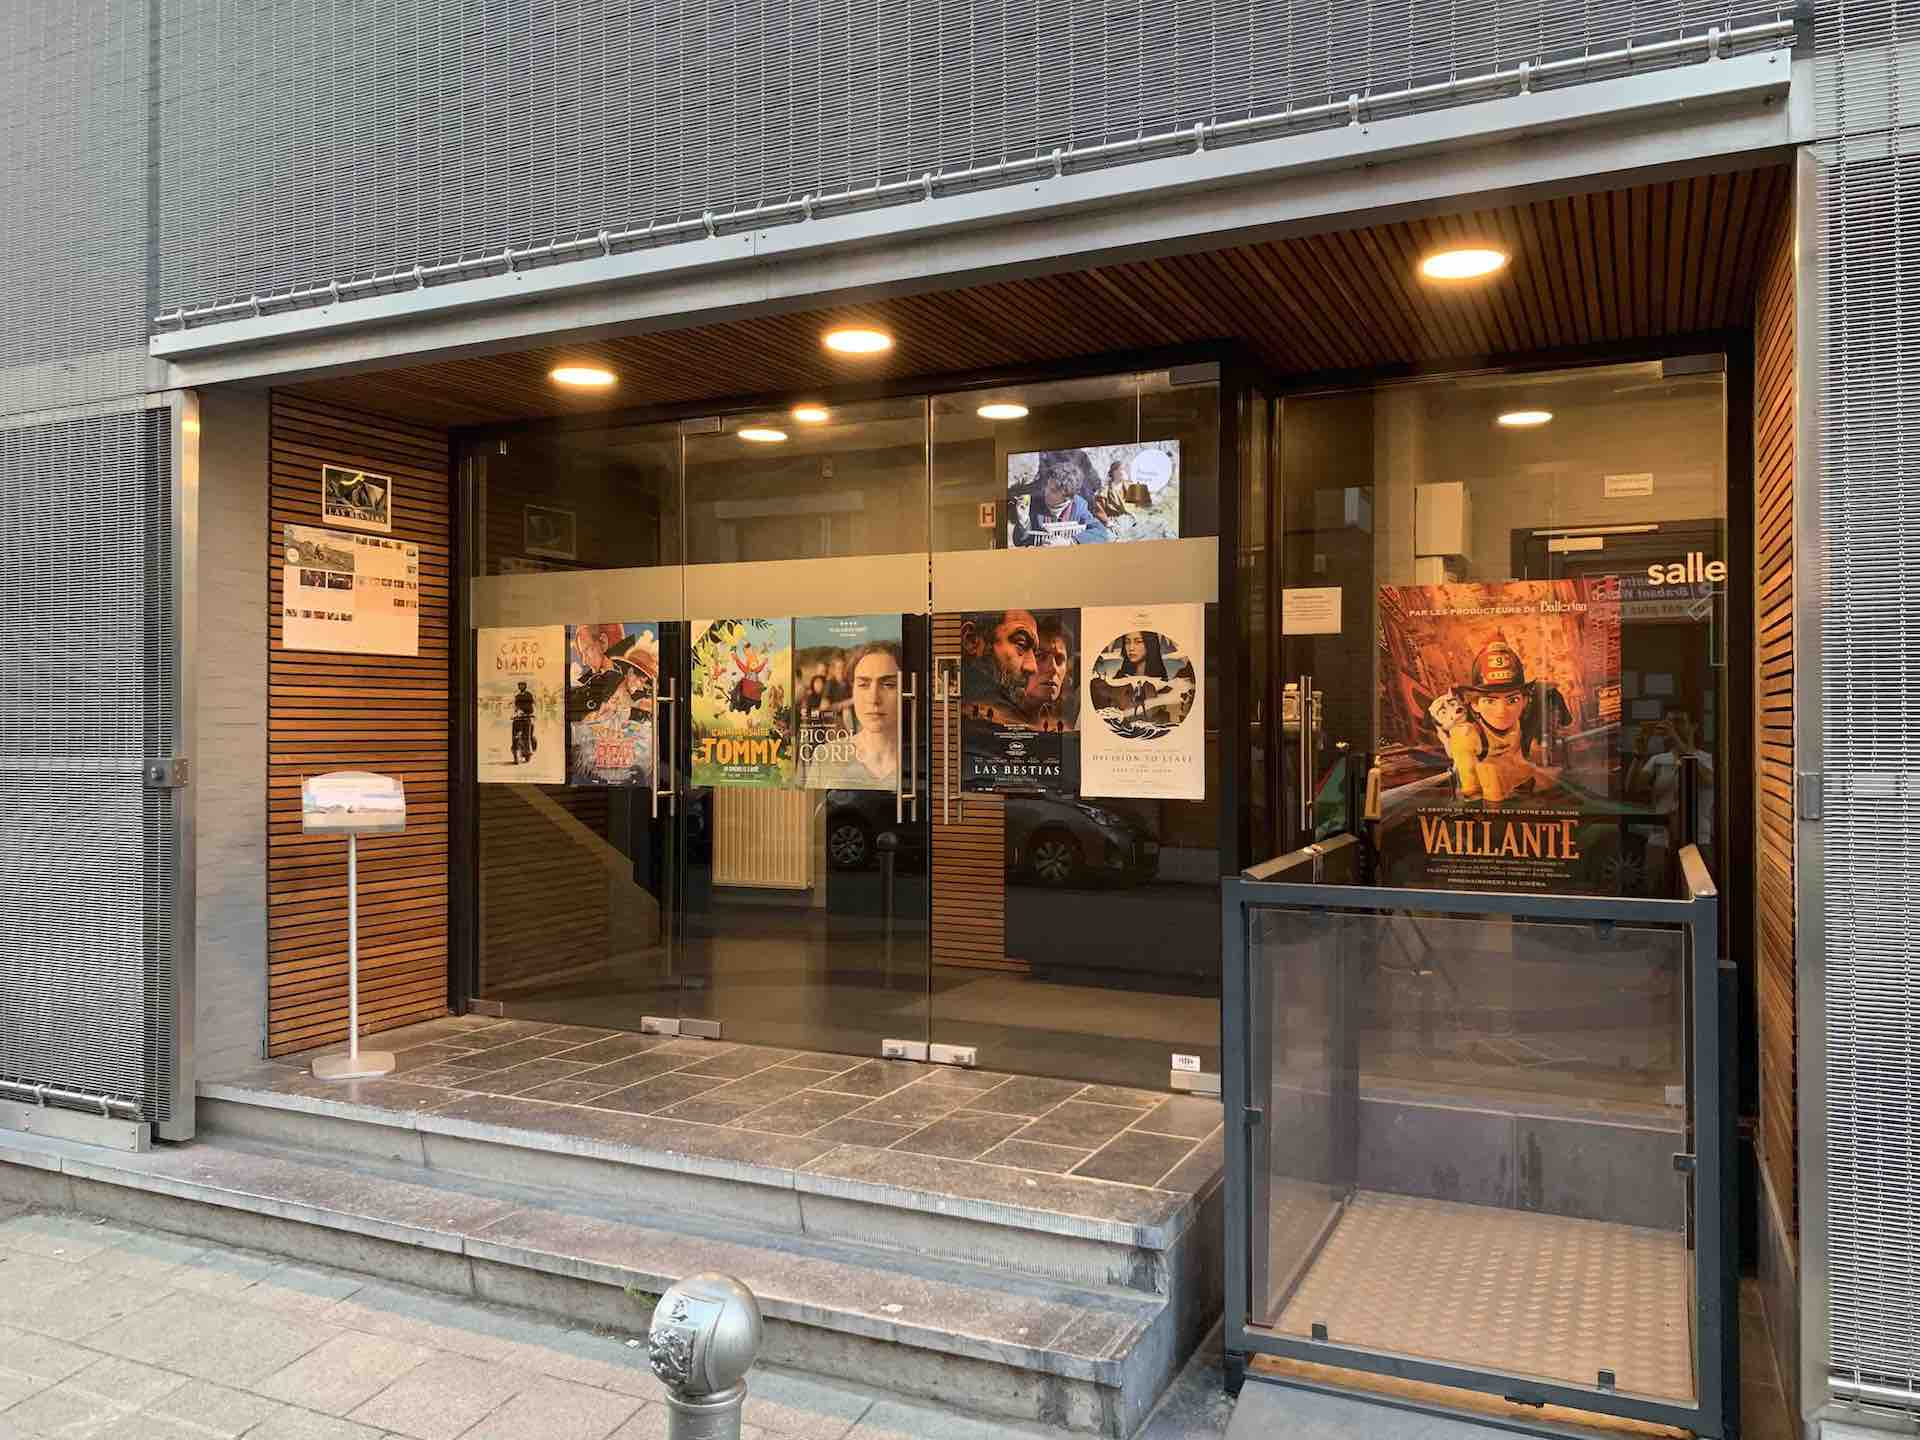 The entry of the cinema nowadays